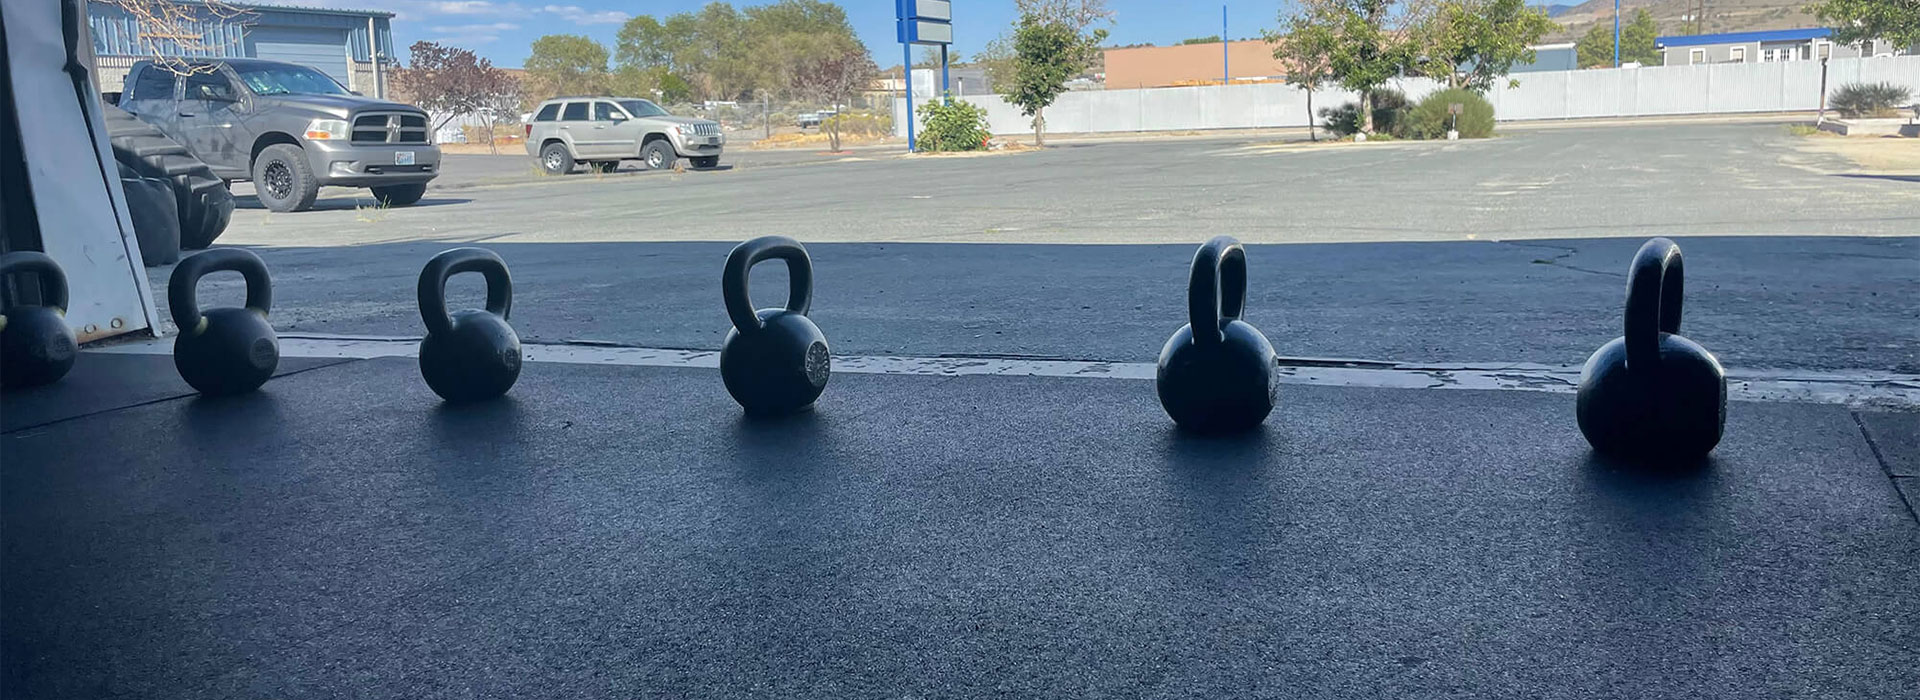 Top 5 Best CrossFit Gyms To Join Near Carson City